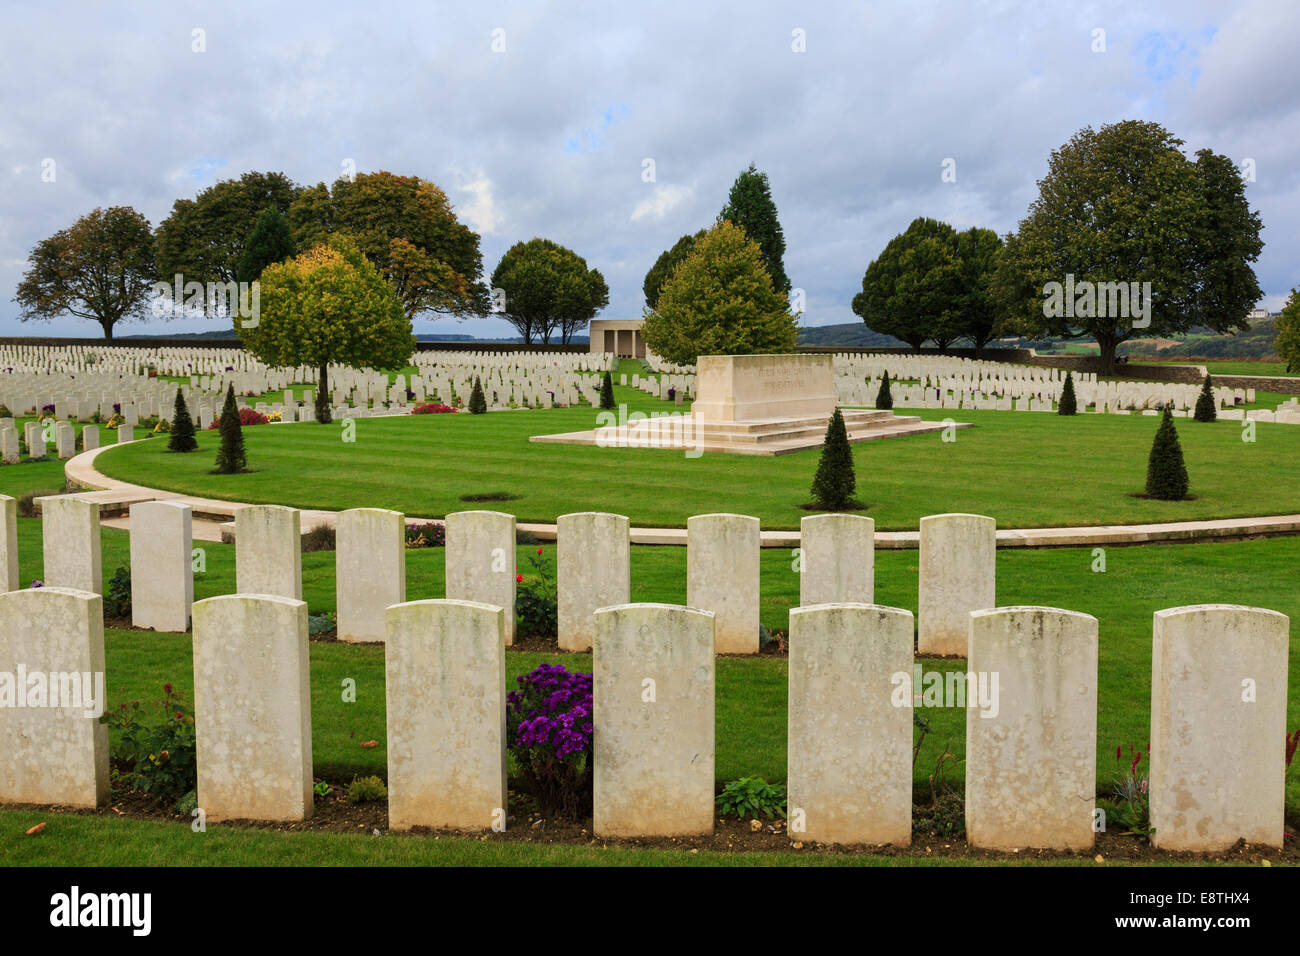 Rows of war grave headstones in Cabaret Rouge British cemetery for First World War Commonwealth soldiers. Souchez France Europe Stock Photo